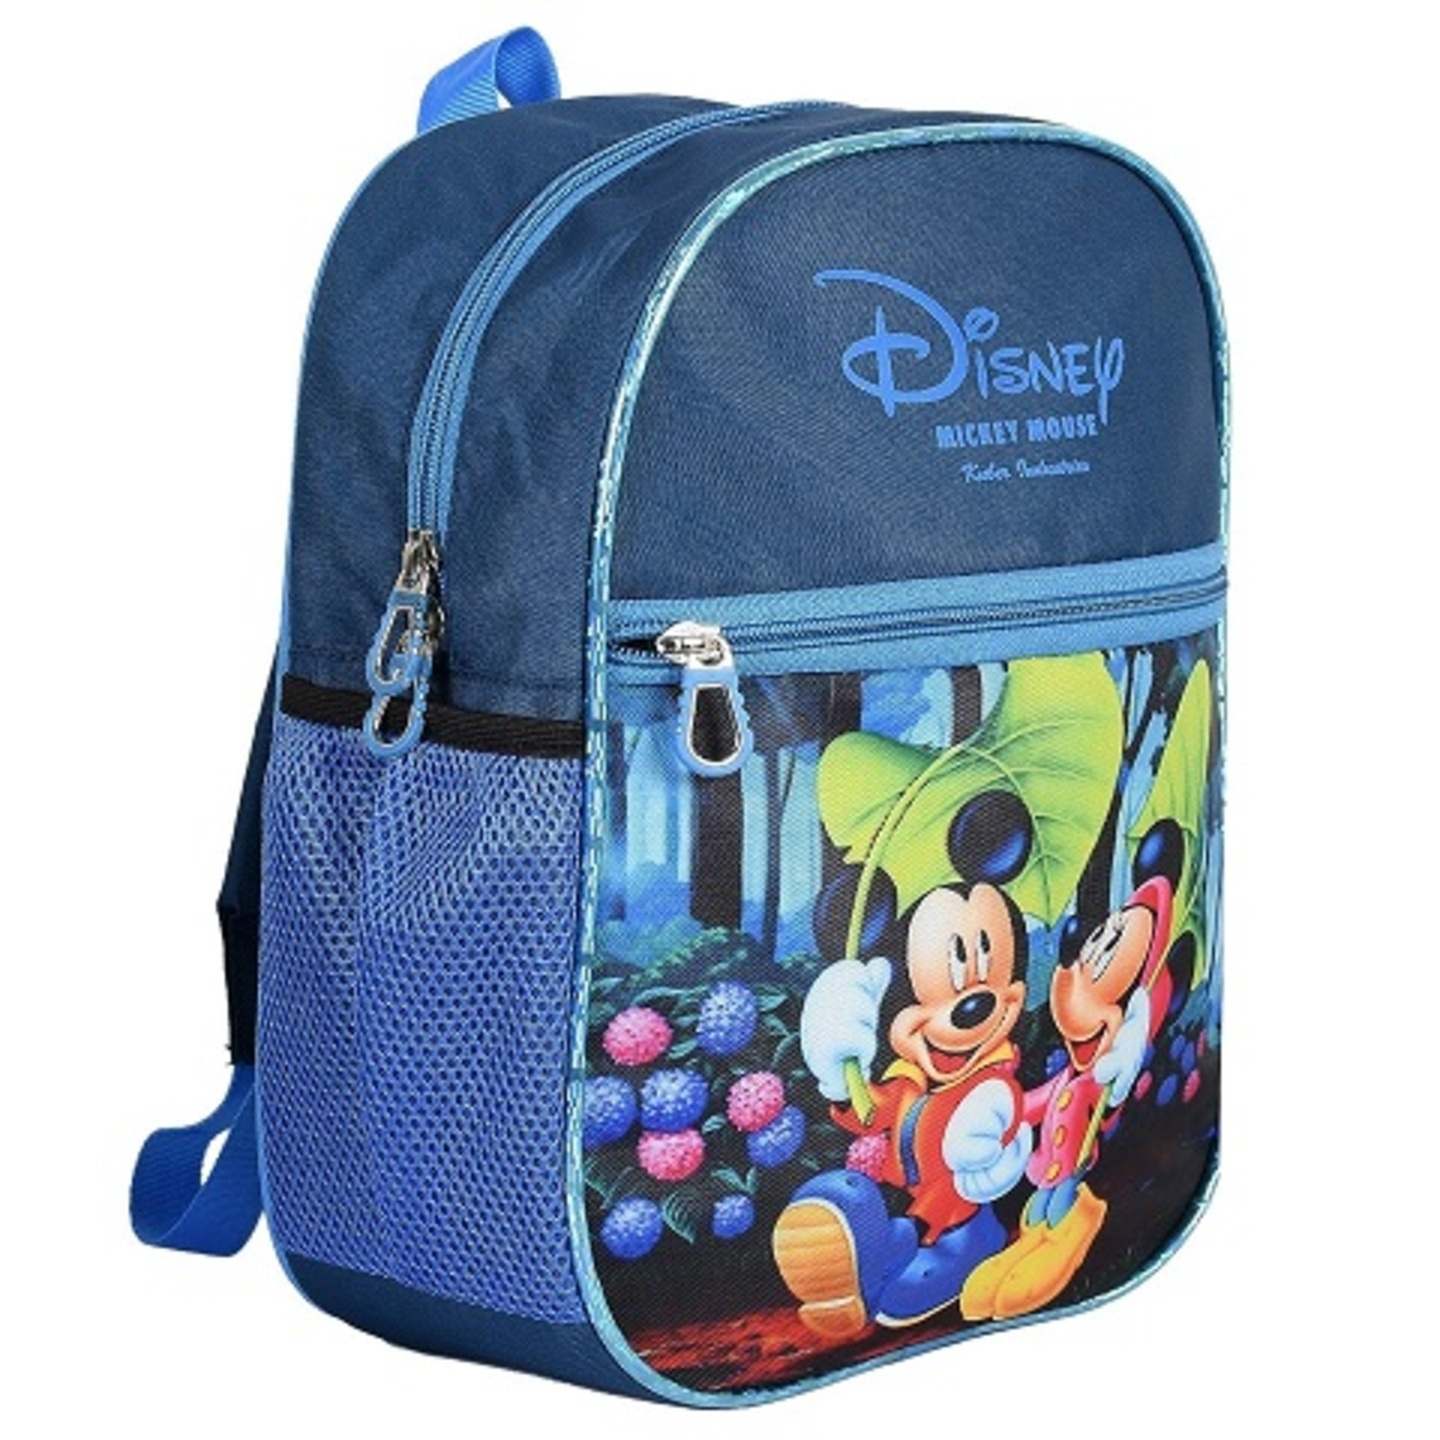 Disney Mickey Minnie Mouse 13 inch School Bag for Kids